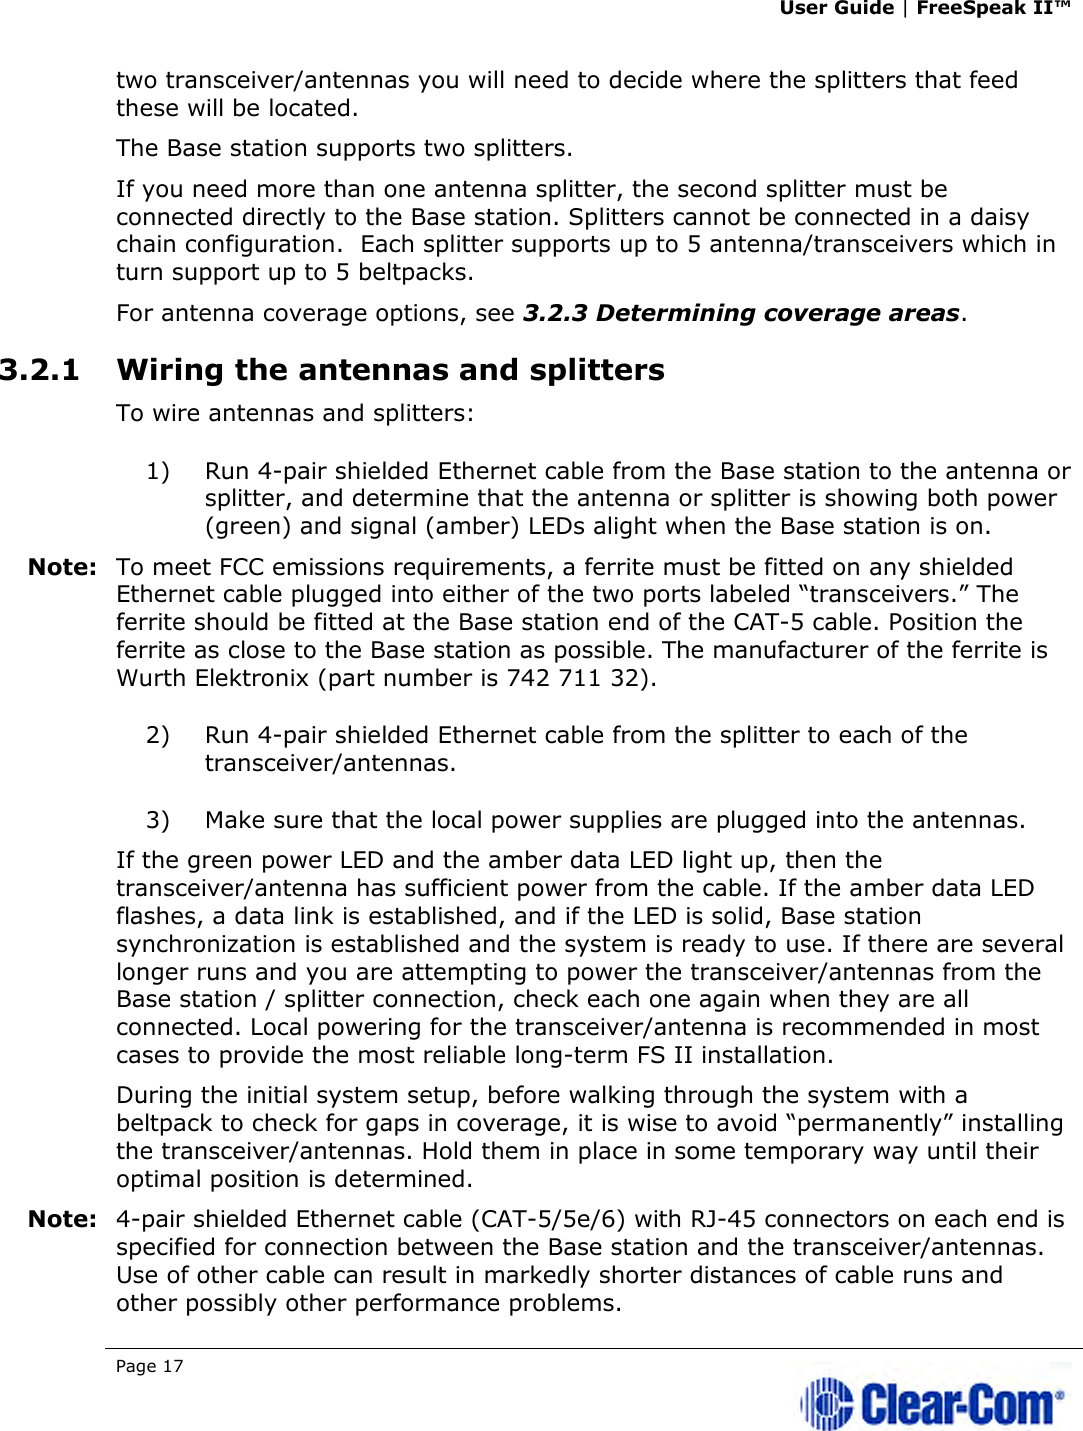 User Guide | FreeSpeak II™  Page 17   two transceiver/antennas you will need to decide where the splitters that feed these will be located.  The Base station supports two splitters. If you need more than one antenna splitter, the second splitter must be connected directly to the Base station. Splitters cannot be connected in a daisy chain configuration.  Each splitter supports up to 5 antenna/transceivers which in turn support up to 5 beltpacks. For antenna coverage options, see 3.2.3 Determining coverage areas.  3.2.1 Wiring the antennas and splitters To wire antennas and splitters: 1) Run 4-pair shielded Ethernet cable from the Base station to the antenna or splitter, and determine that the antenna or splitter is showing both power (green) and signal (amber) LEDs alight when the Base station is on.  Note: To meet FCC emissions requirements, a ferrite must be fitted on any shielded Ethernet cable plugged into either of the two ports labeled “transceivers.” The ferrite should be fitted at the Base station end of the CAT-5 cable. Position the ferrite as close to the Base station as possible. The manufacturer of the ferrite is Wurth Elektronix (part number is 742 711 32). 2) Run 4-pair shielded Ethernet cable from the splitter to each of the transceiver/antennas.  3) Make sure that the local power supplies are plugged into the antennas.  If the green power LED and the amber data LED light up, then the transceiver/antenna has sufficient power from the cable. If the amber data LED flashes, a data link is established, and if the LED is solid, Base station synchronization is established and the system is ready to use. If there are several longer runs and you are attempting to power the transceiver/antennas from the Base station / splitter connection, check each one again when they are all connected. Local powering for the transceiver/antenna is recommended in most cases to provide the most reliable long-term FS II installation. During the initial system setup, before walking through the system with a beltpack to check for gaps in coverage, it is wise to avoid “permanently” installing the transceiver/antennas. Hold them in place in some temporary way until their optimal position is determined. Note: 4-pair shielded Ethernet cable (CAT-5/5e/6) with RJ-45 connectors on each end is specified for connection between the Base station and the transceiver/antennas. Use of other cable can result in markedly shorter distances of cable runs and other possibly other performance problems. 